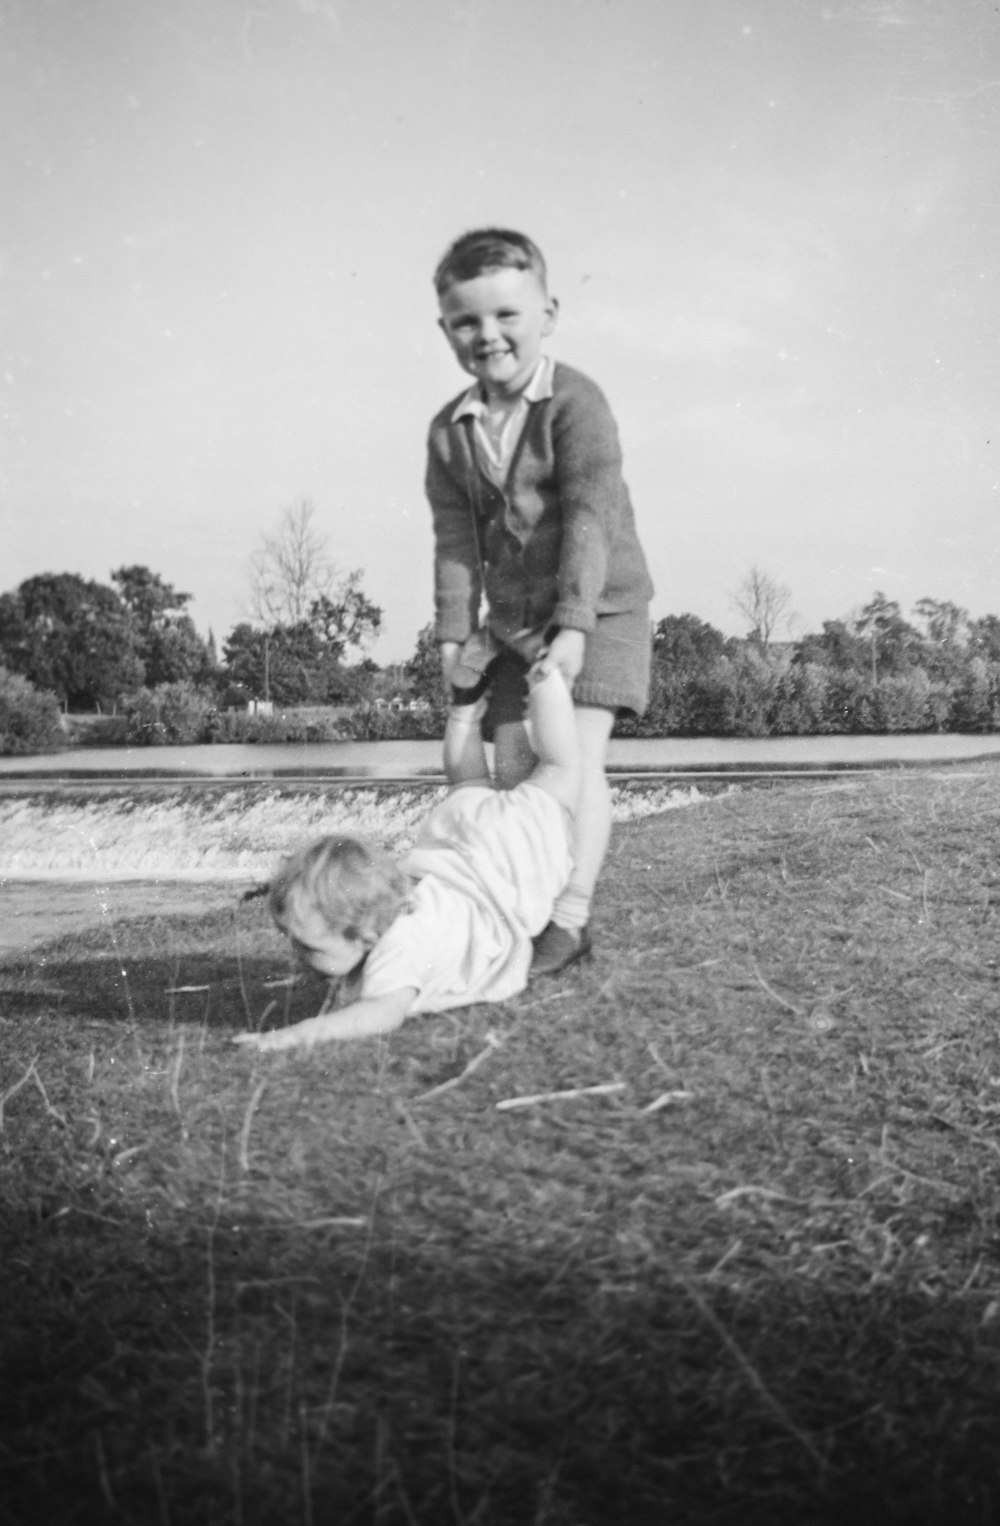 an old photo of a young boy playing with a baby